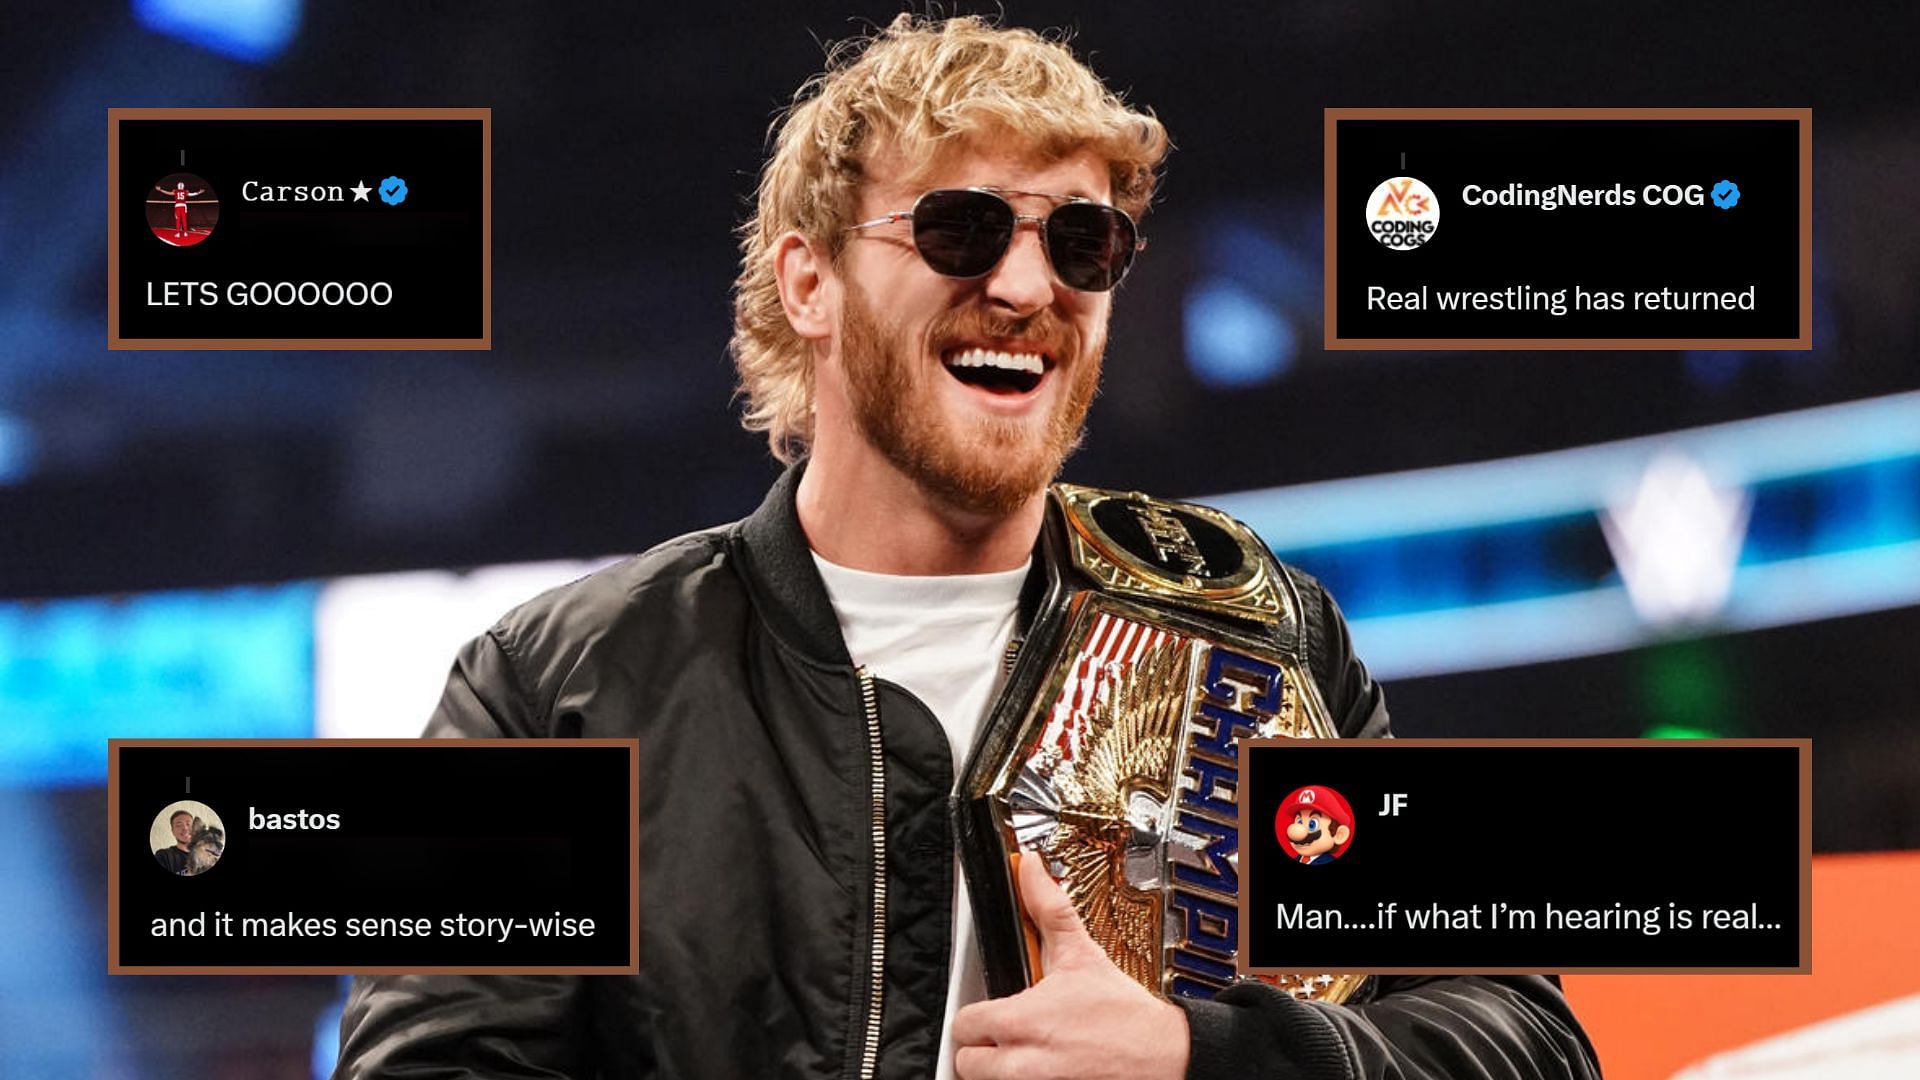 Logan Paul is the current United States Champion!